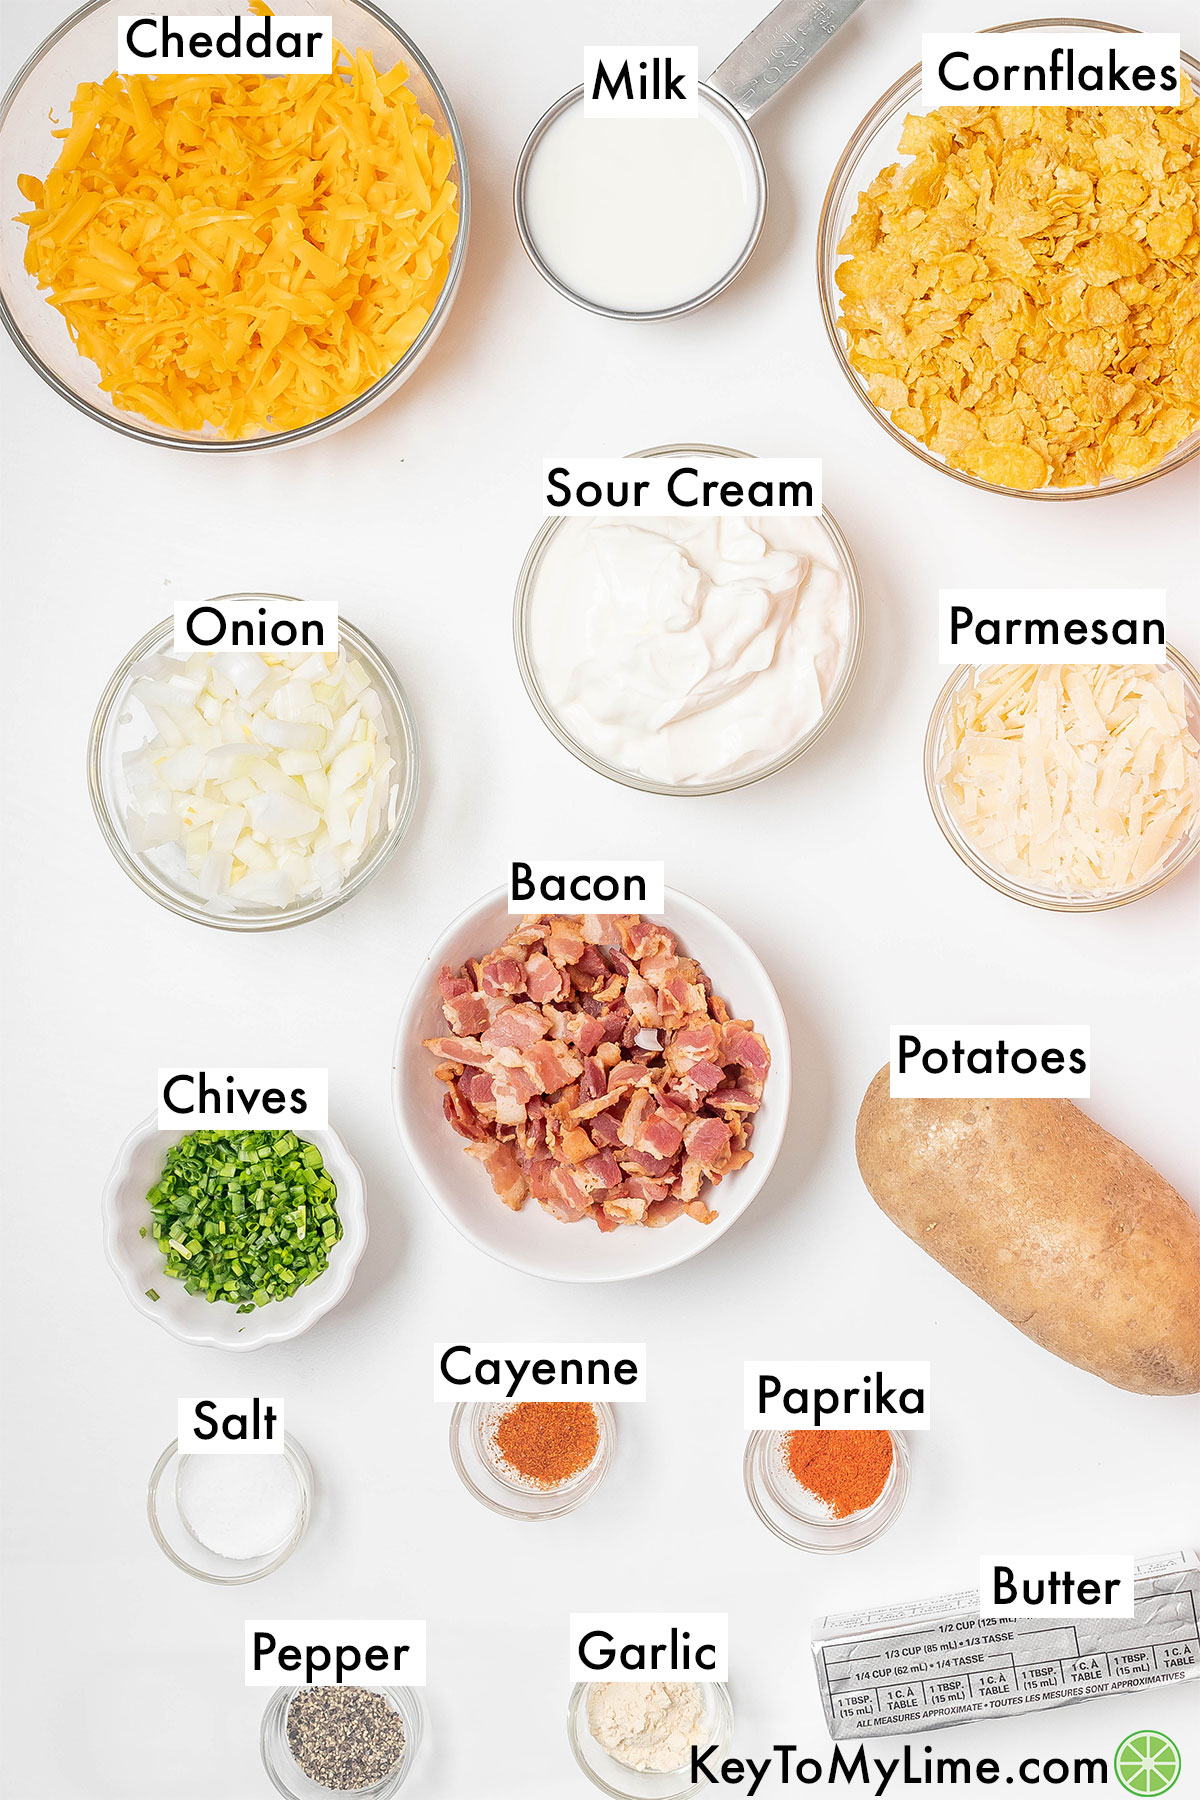 The labeled ingredients for cheesy potato casserole.